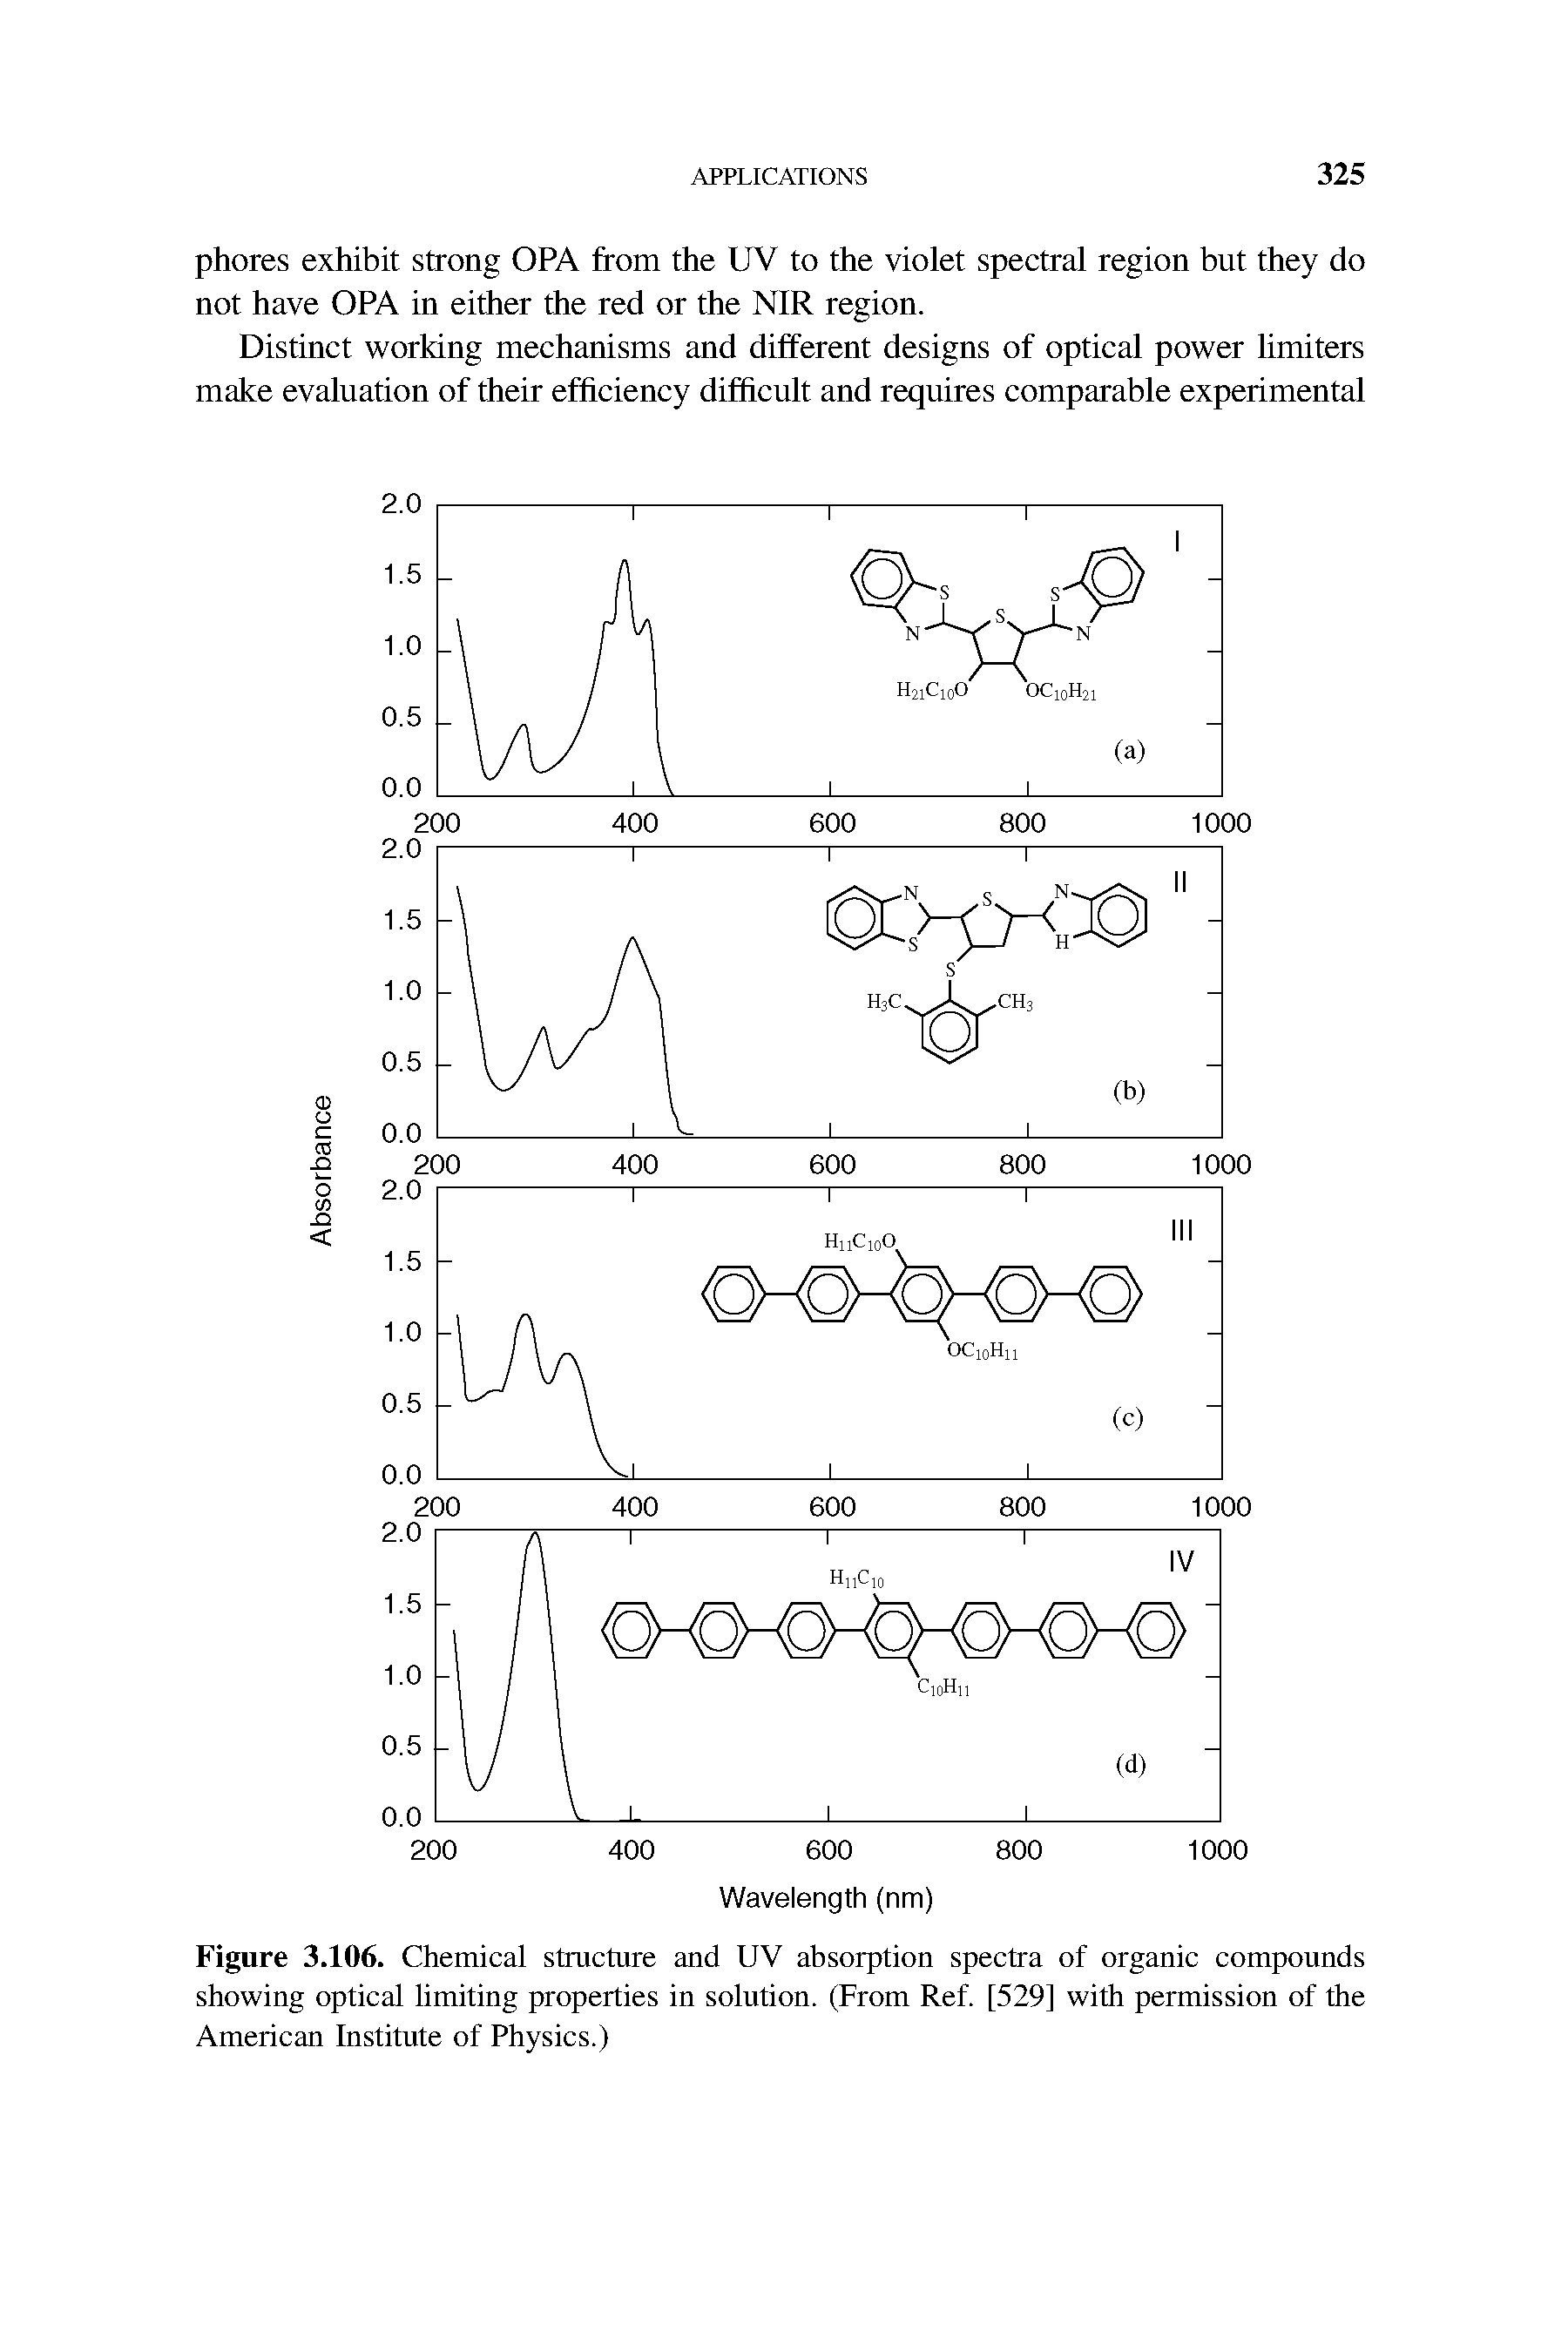 Figure 3.106. Chemical structure and UV absorption spectra of organic compounds showing optical limiting properties in solution. (From Ref. [529] with permission of the American Institute of Physics.)...